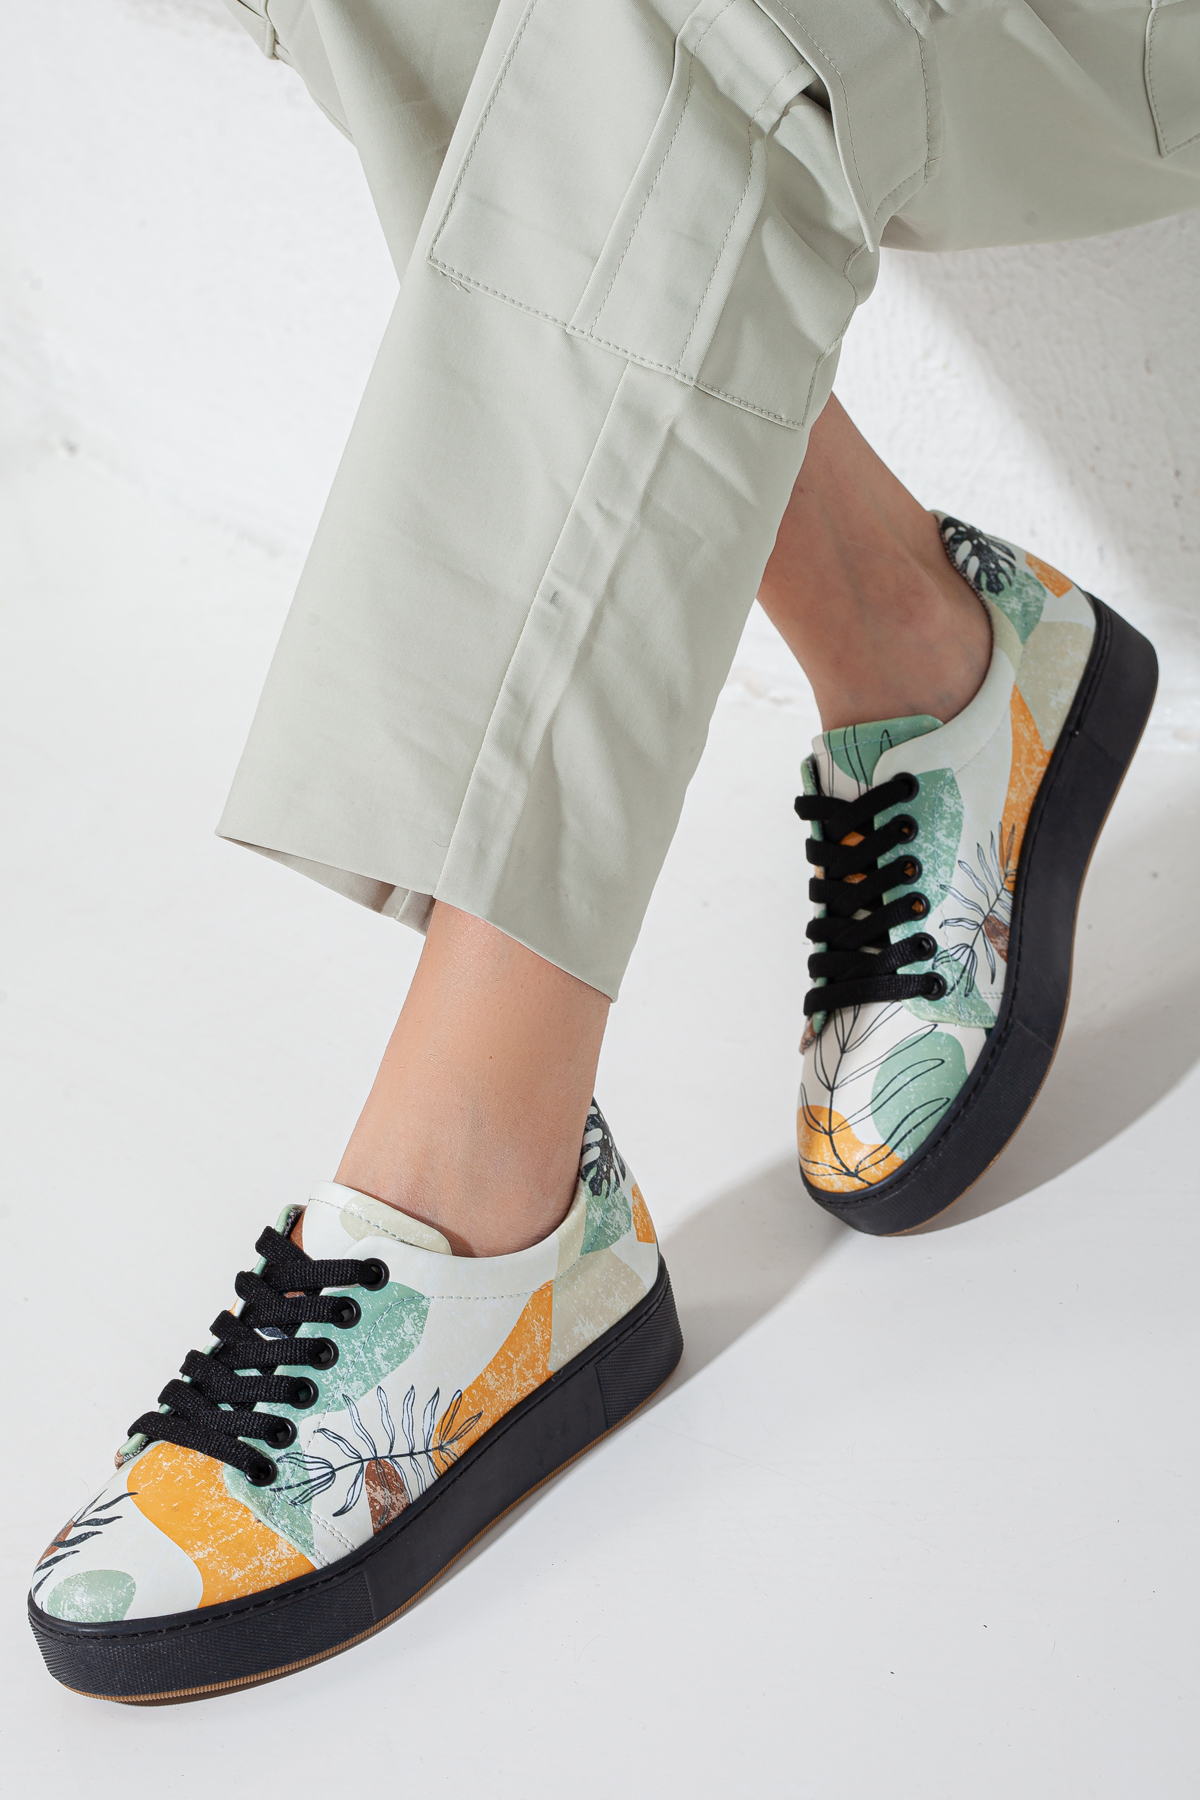 Autumn patterned sneakers shoes